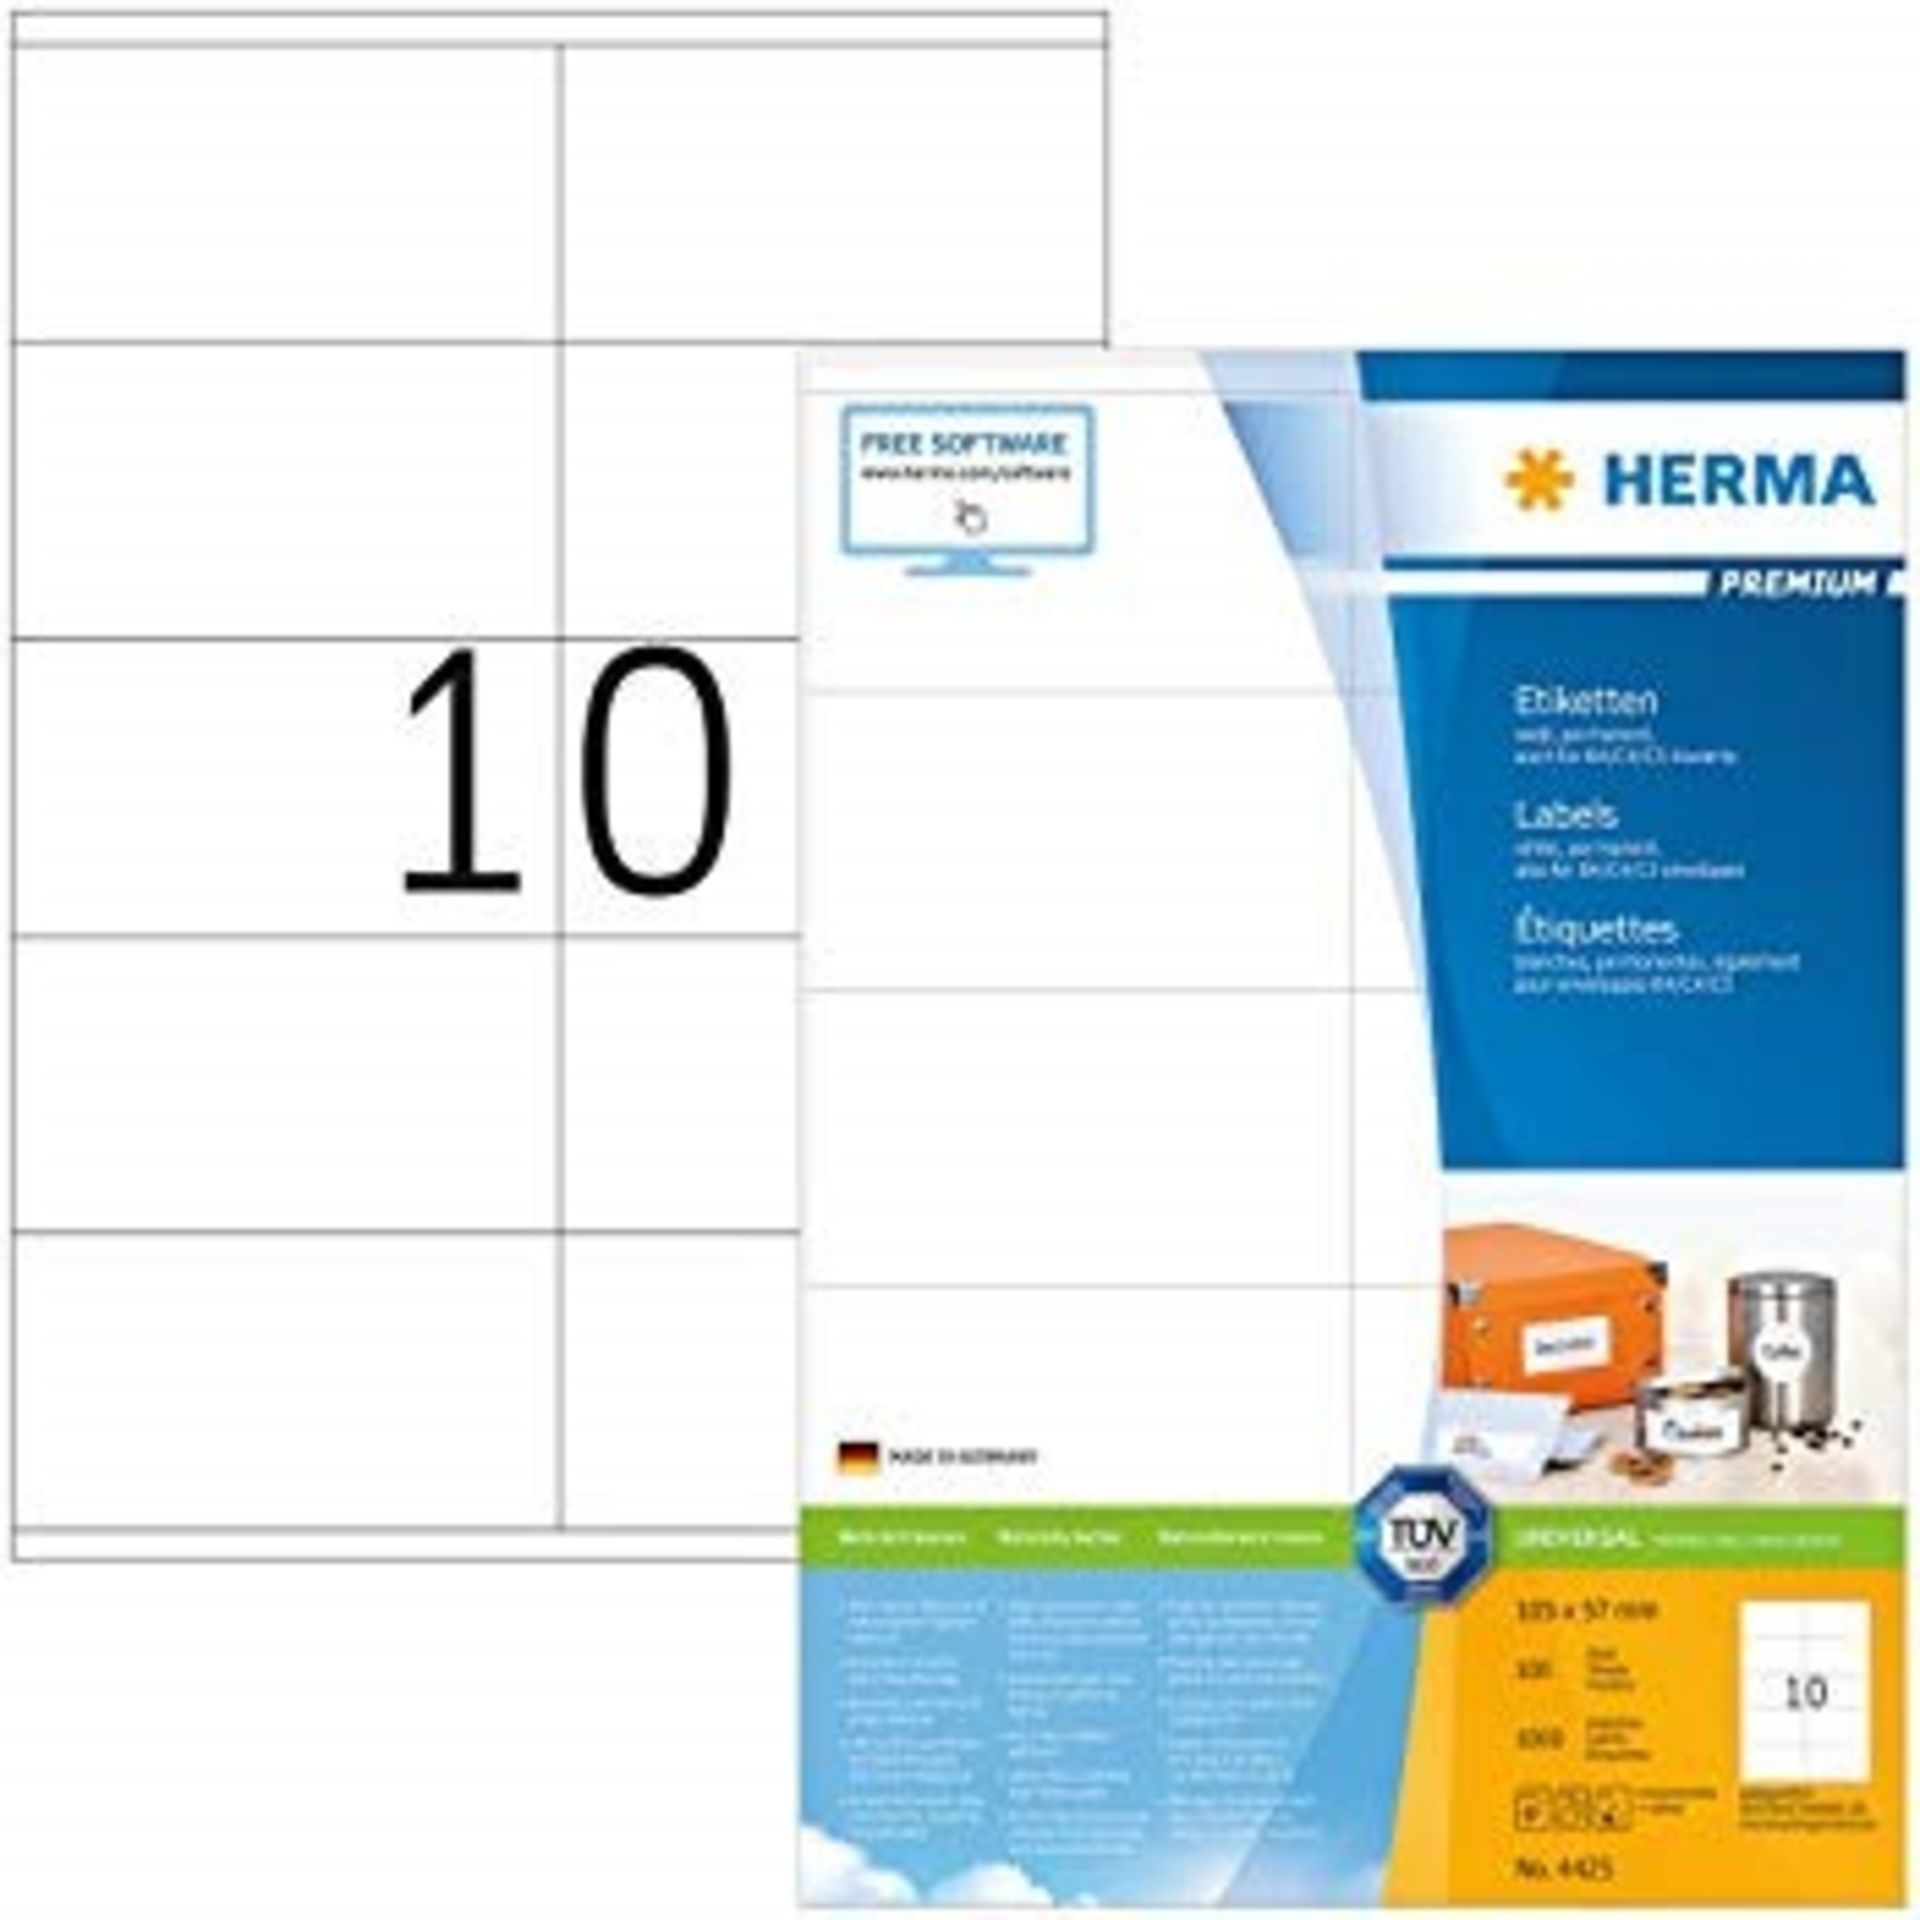 5 AS NEW BOXED HERMA 4268 LABLES PREMIUM A4 100 SHEETS PER PACK 10 LABELS TO A PAGE / RRP £165.00 (